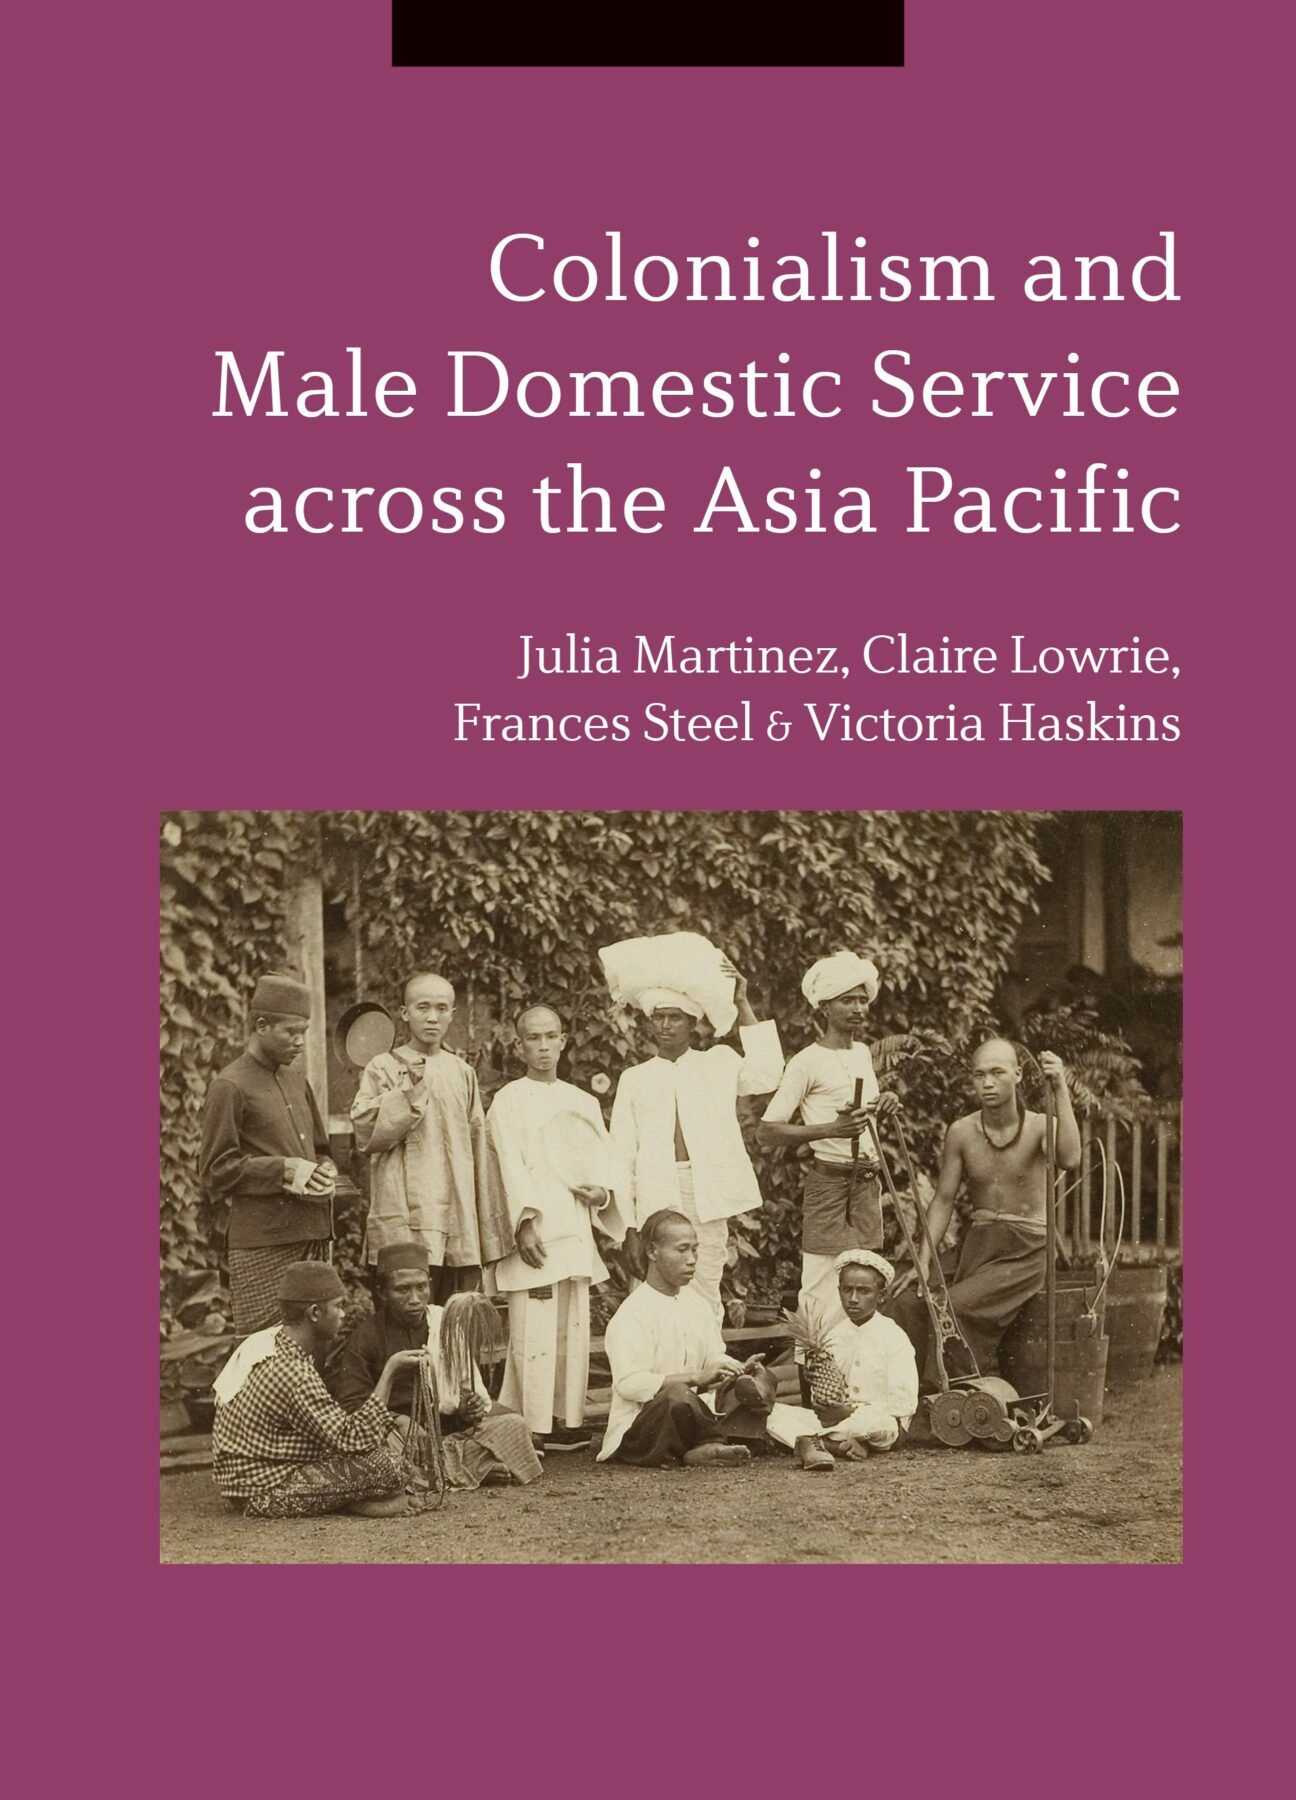 A purple book cover with a black-and white photograph in the centre, featuring a group of South-East Asian men holding various tools and household items.